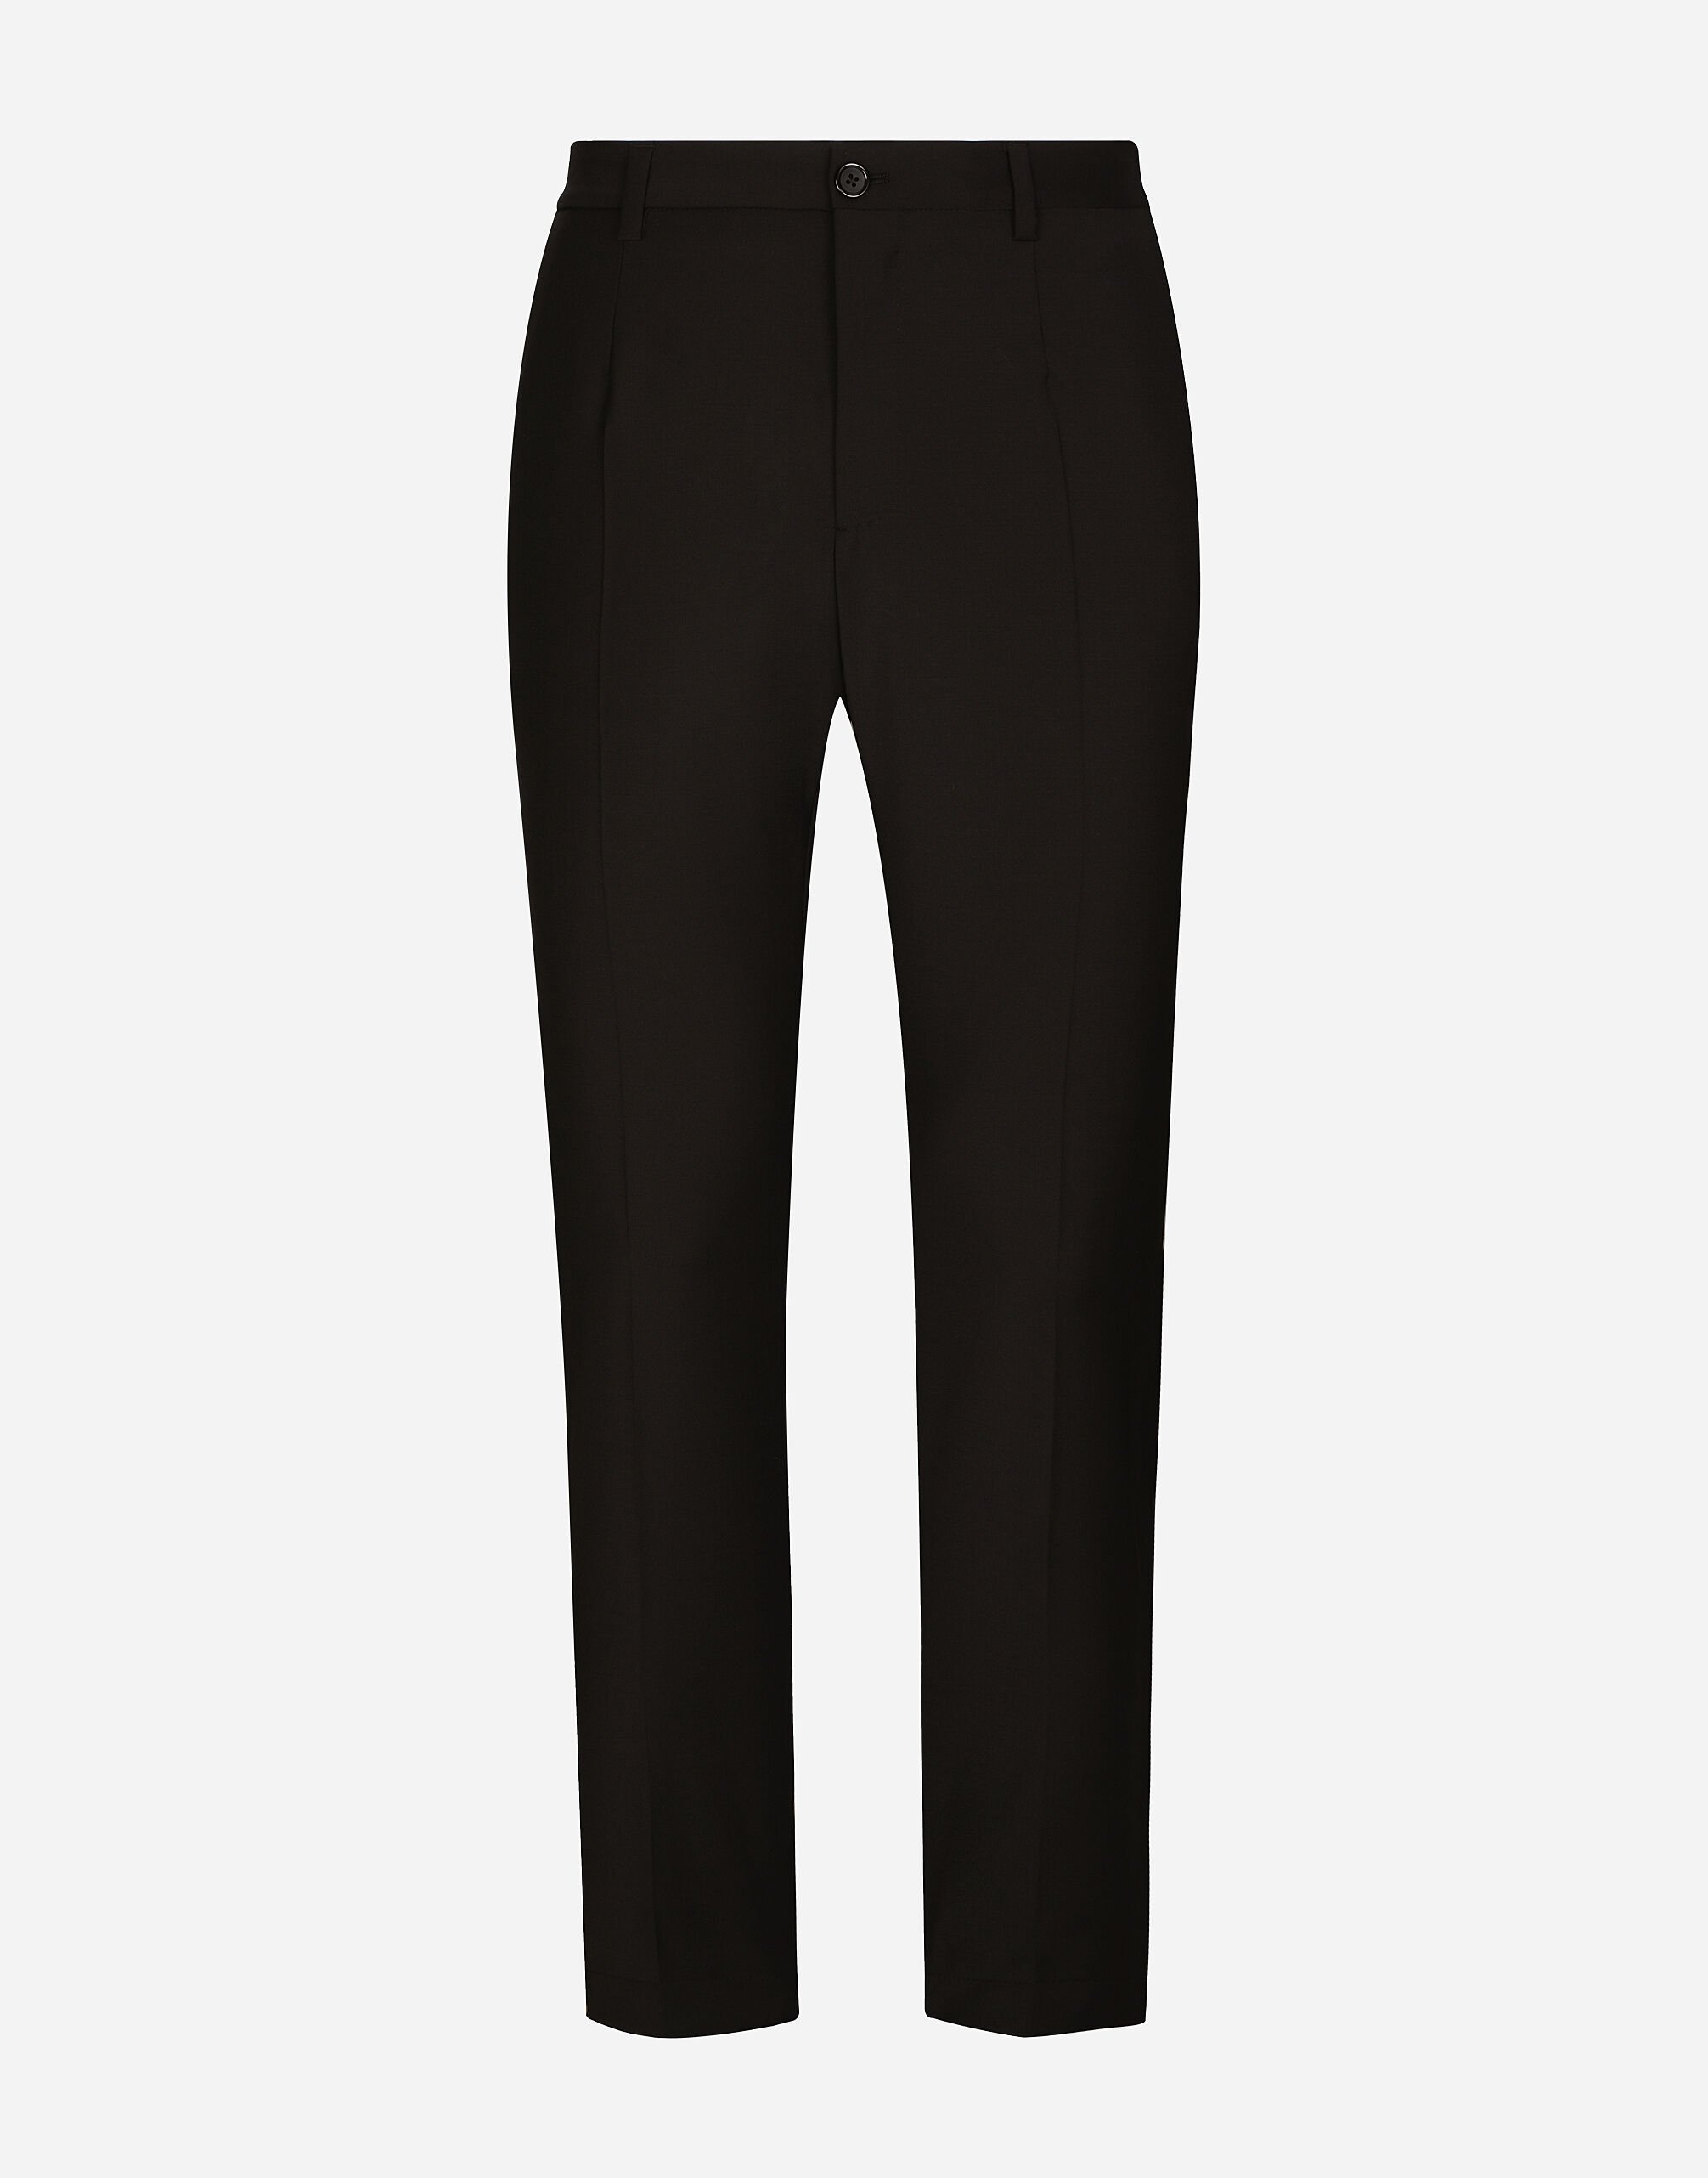 Dolce & Gabbana Stretch cotton pants with DG embroidery Black VG4390VP187